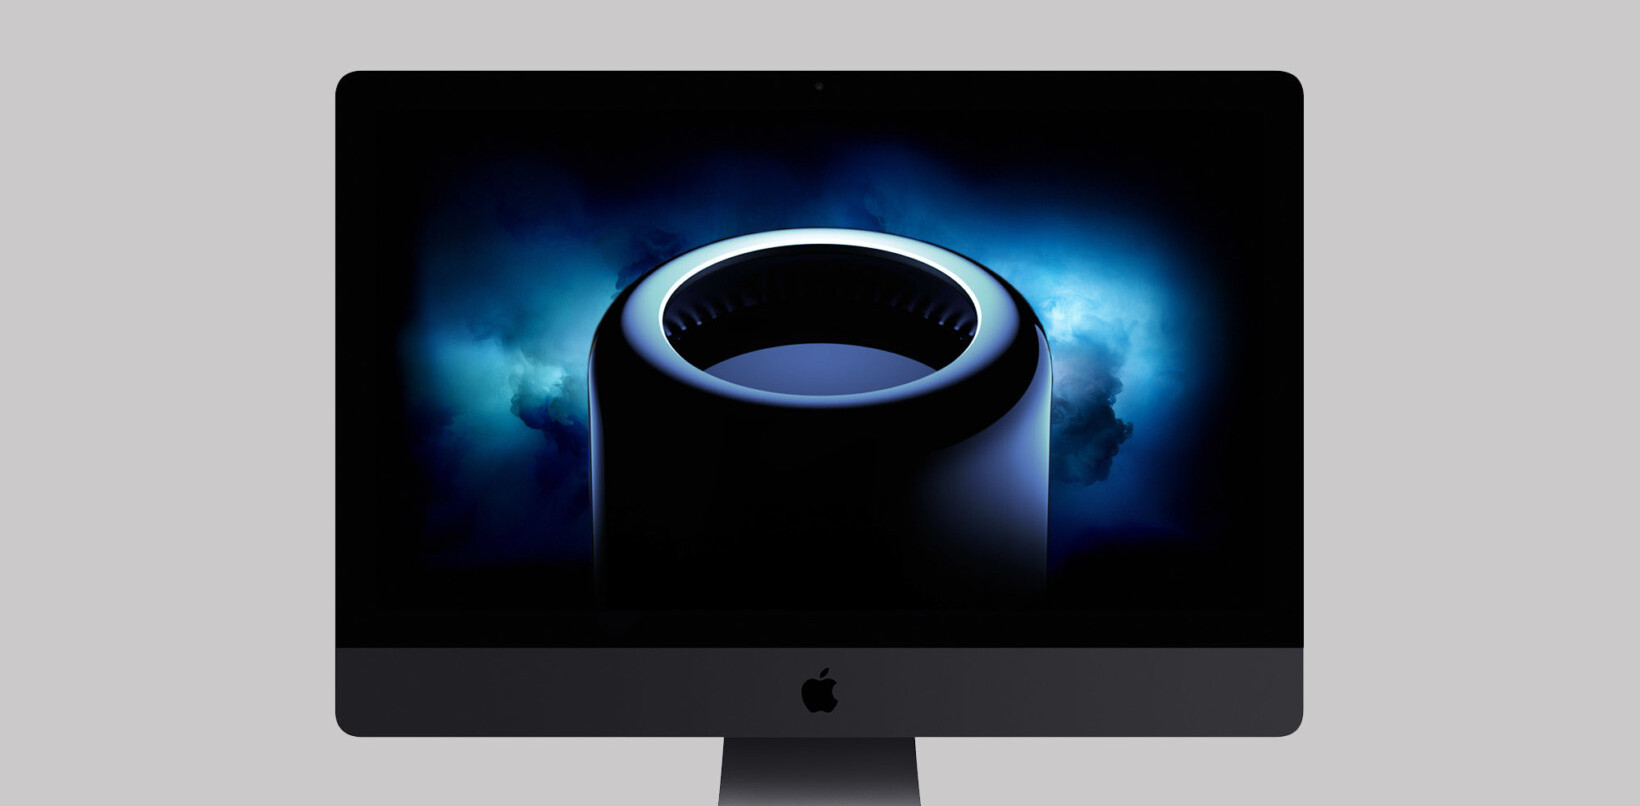 The iMac Pro is not Apple’s replacement for the Mac Pro